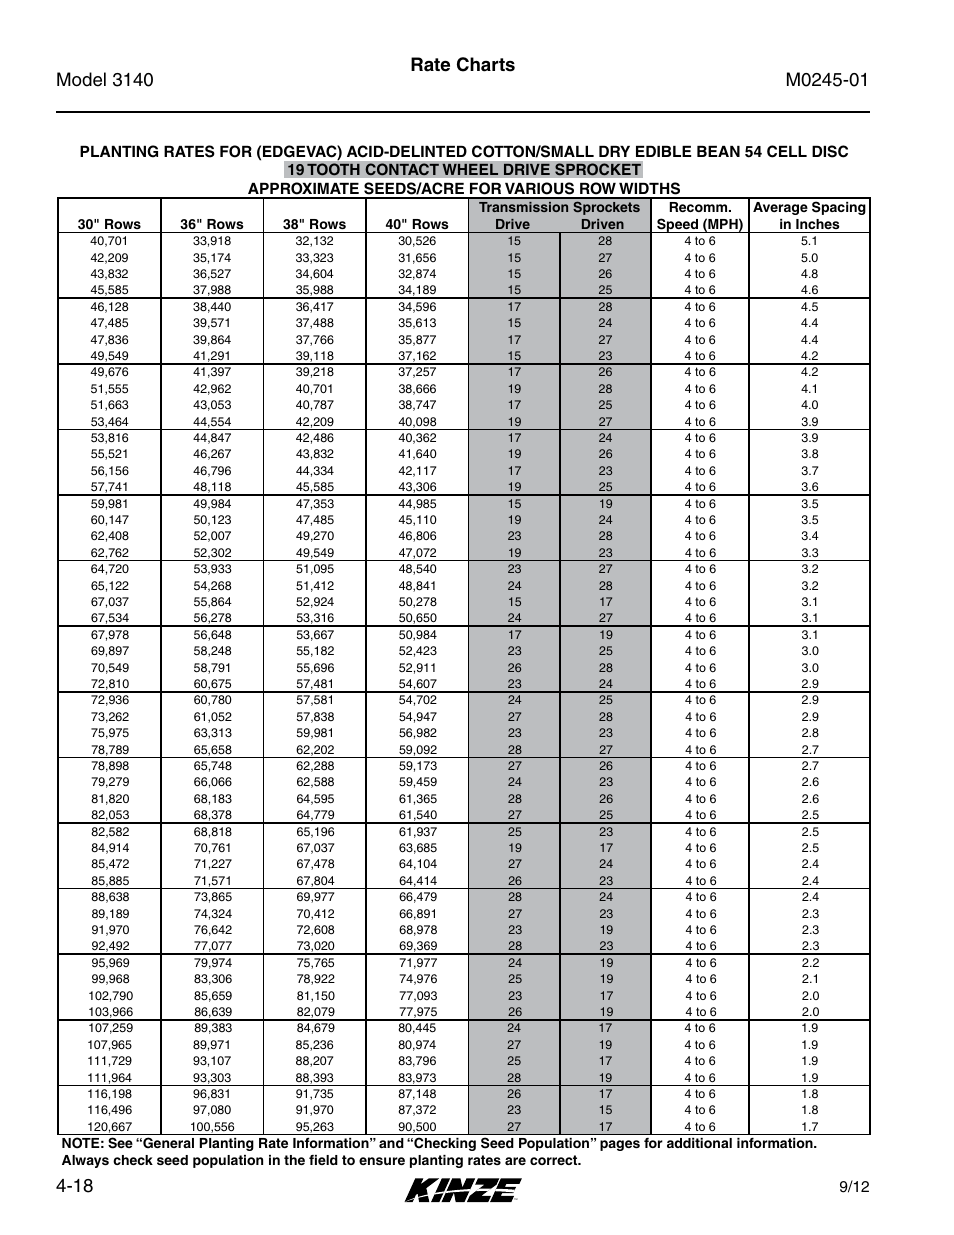 Rate charts | Kinze 3140 Stack Fold Planter Rev. 7/14 User Manual | Page 74 / 150